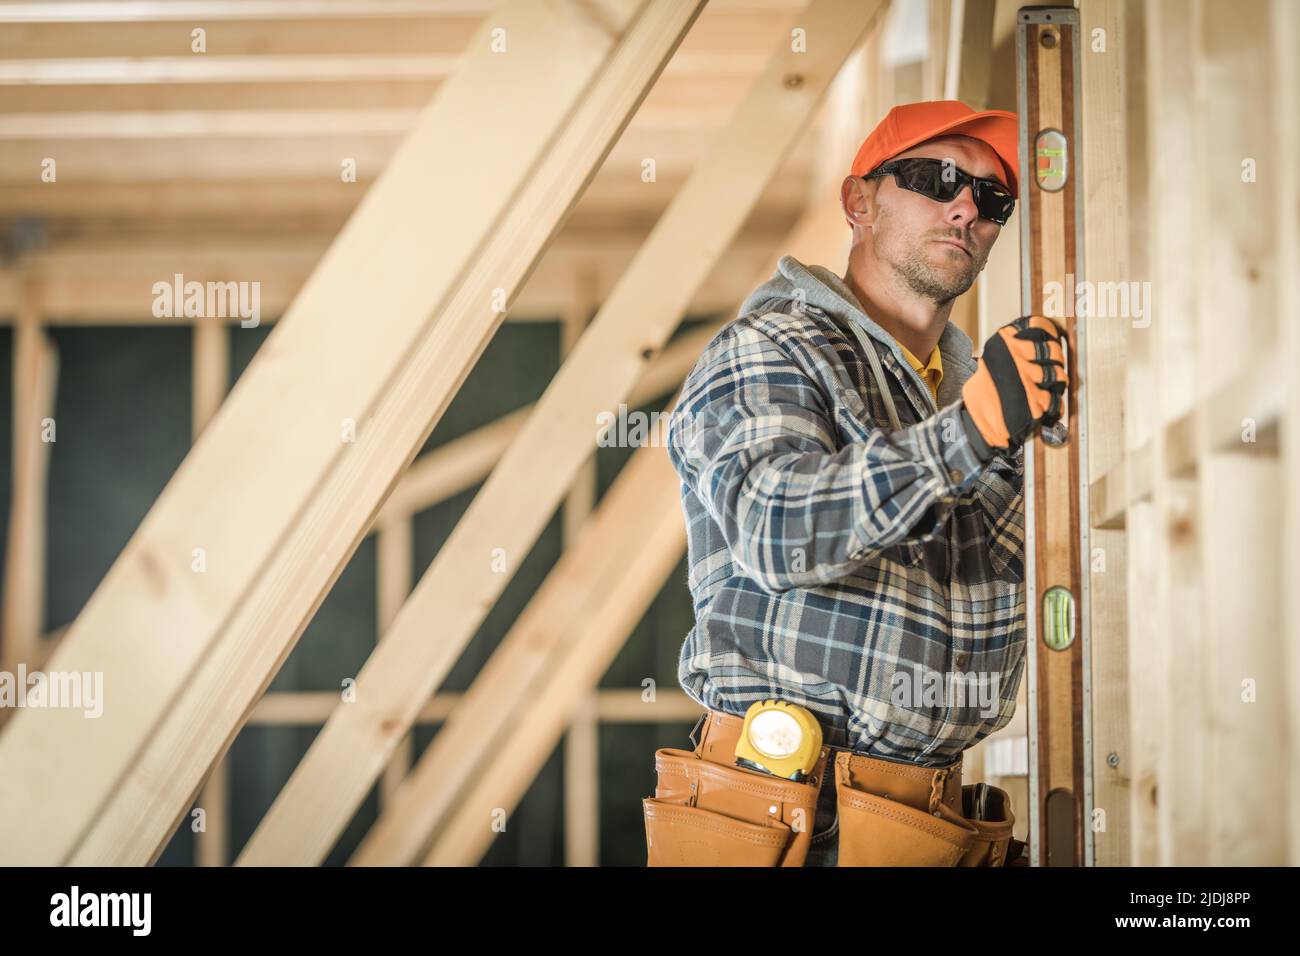 Caucasian Construction Worker Verifying the Straightness of Freshly Built Wooden House Roof Skeleton Using His Building Spirit Level Tool. Constructio Stock Photo